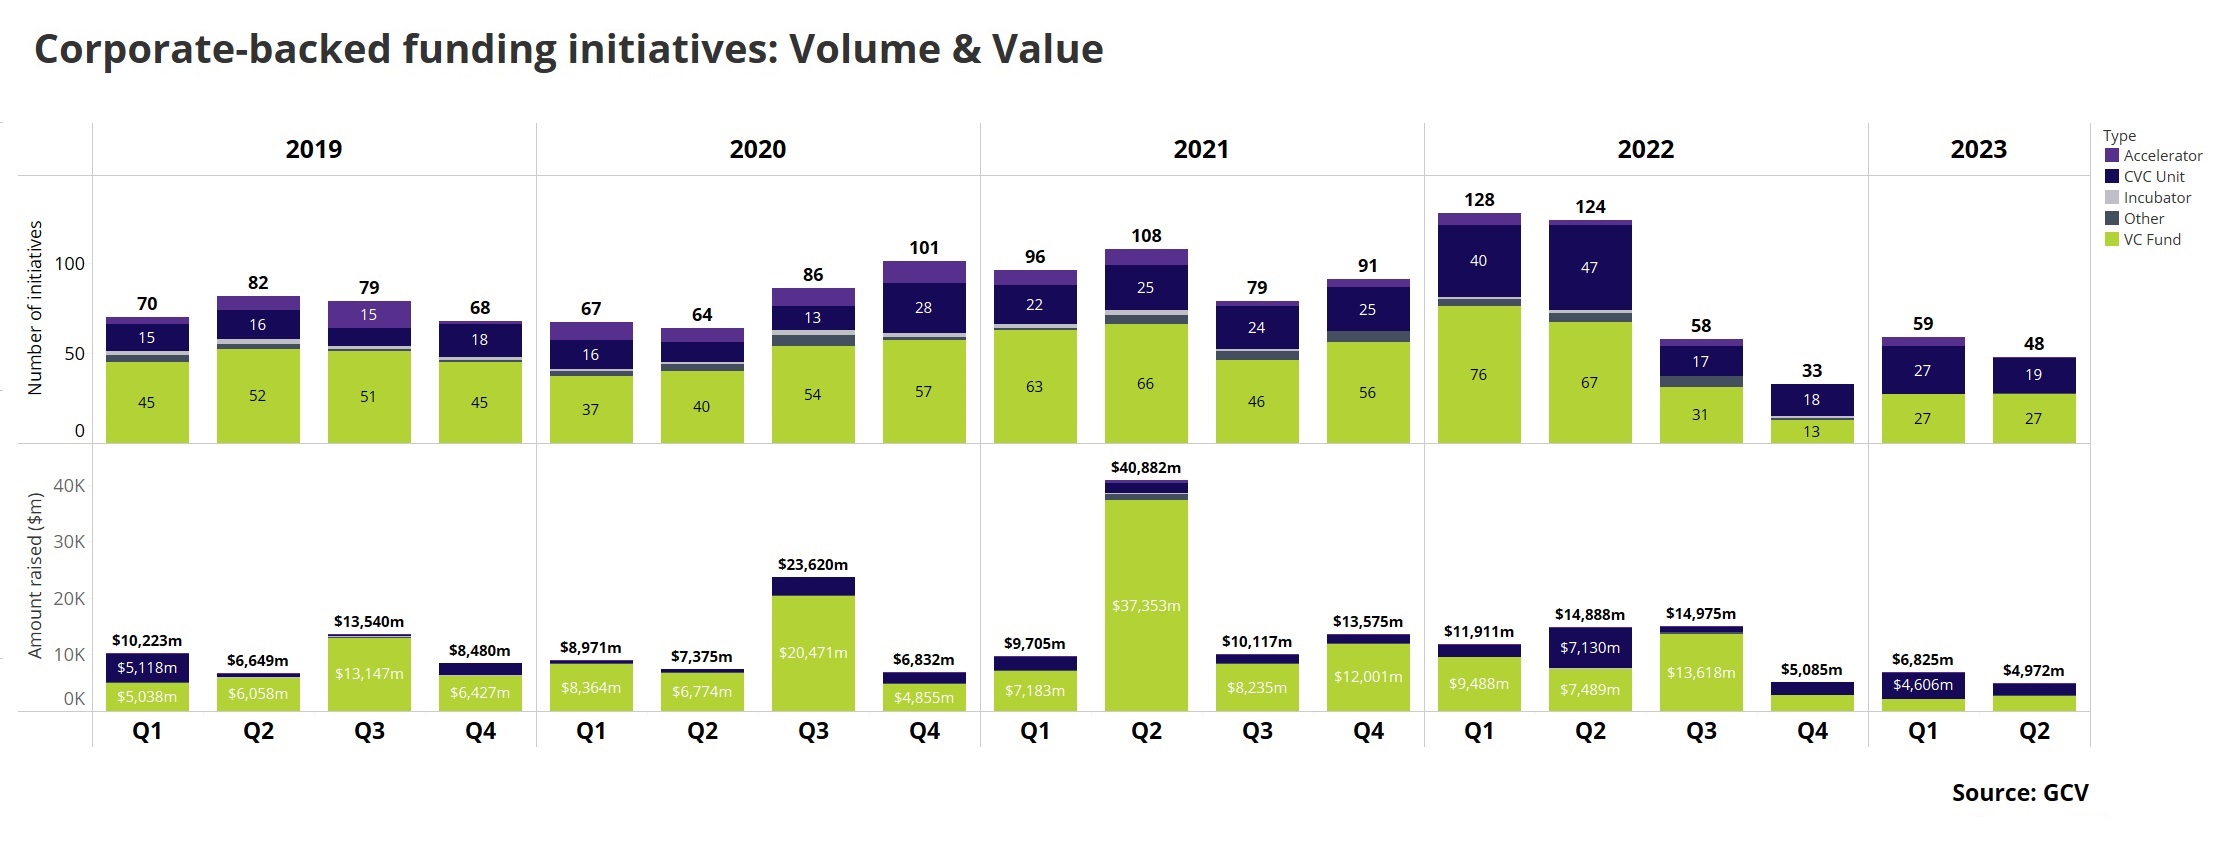 Stacked bar charts showing corporate-backed funding initiatives: volume and value. Source: GCV